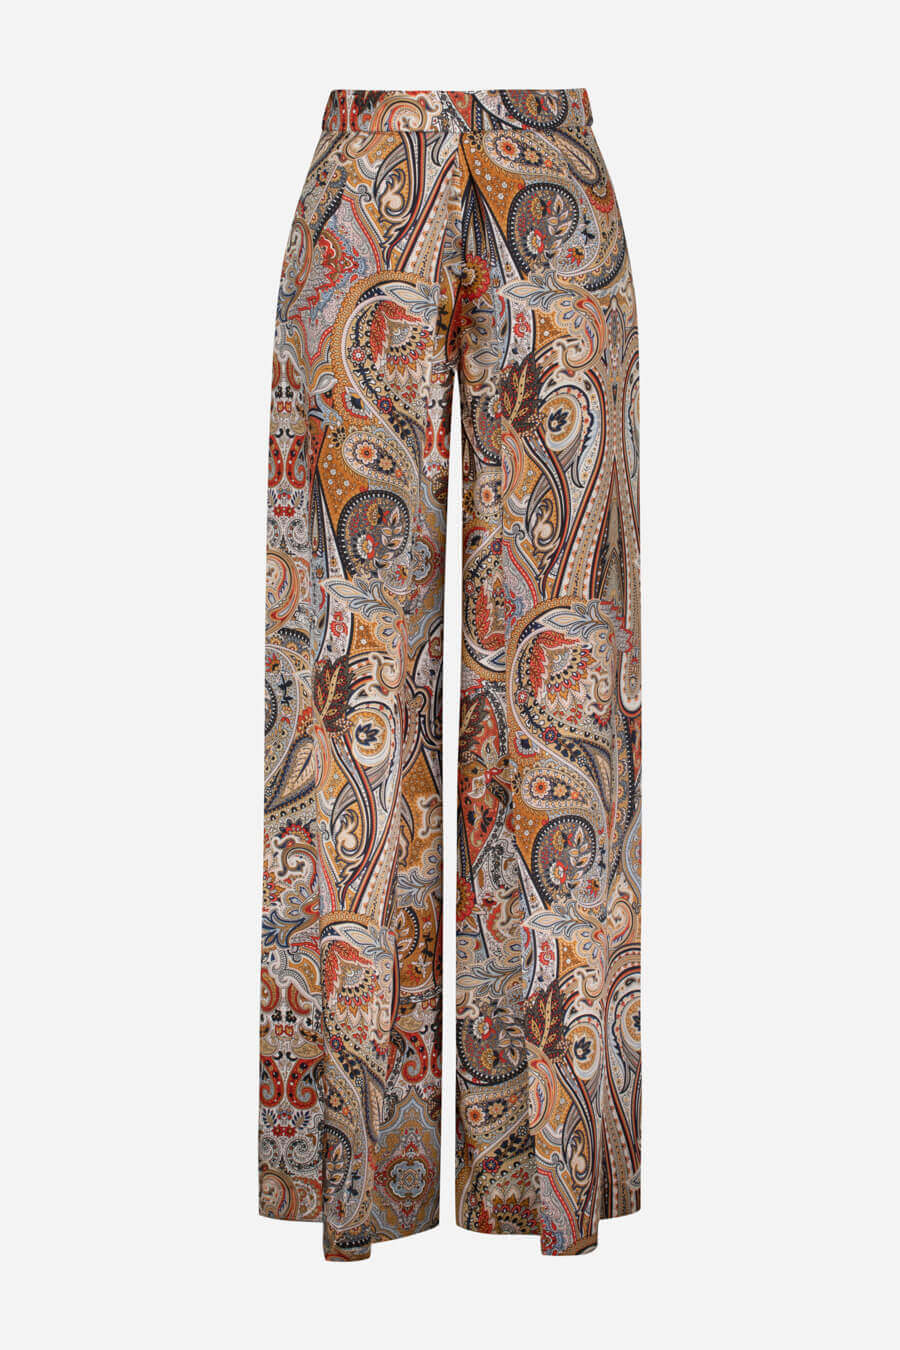 High-waist pants with wide leg and front slits in paisley | D2line